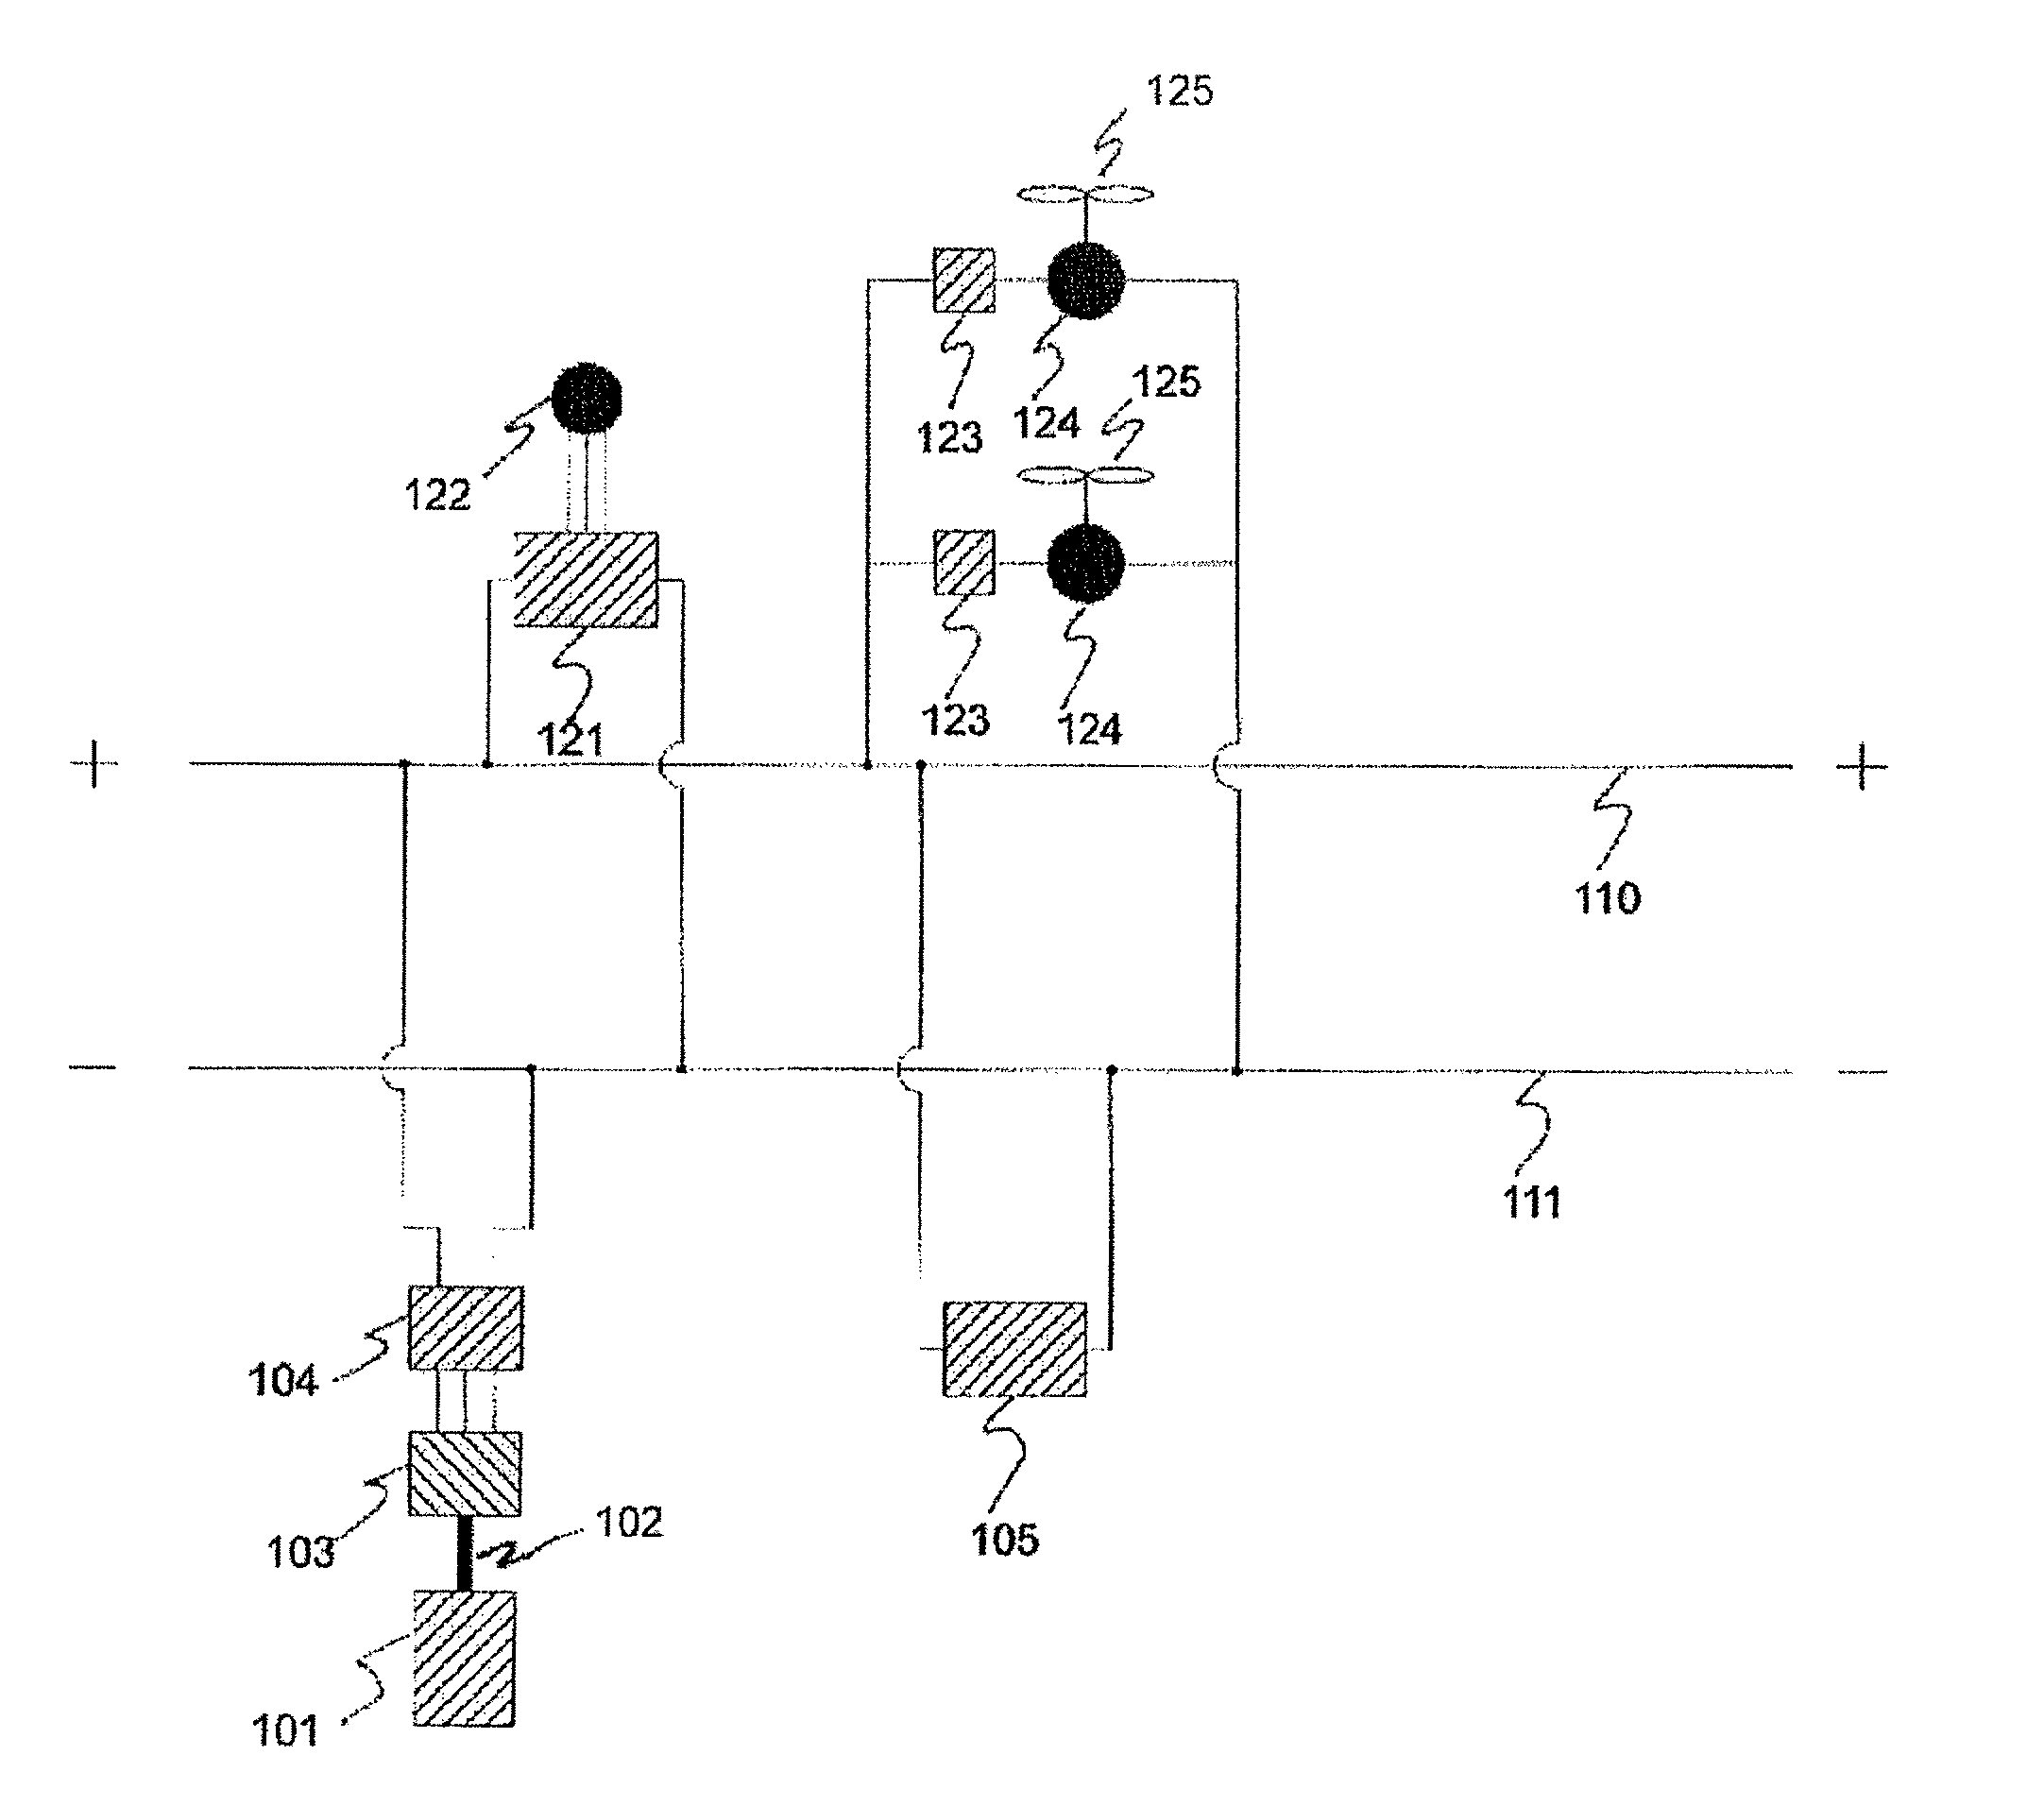 Marine power train system and method of storing energy in a marine vehicle